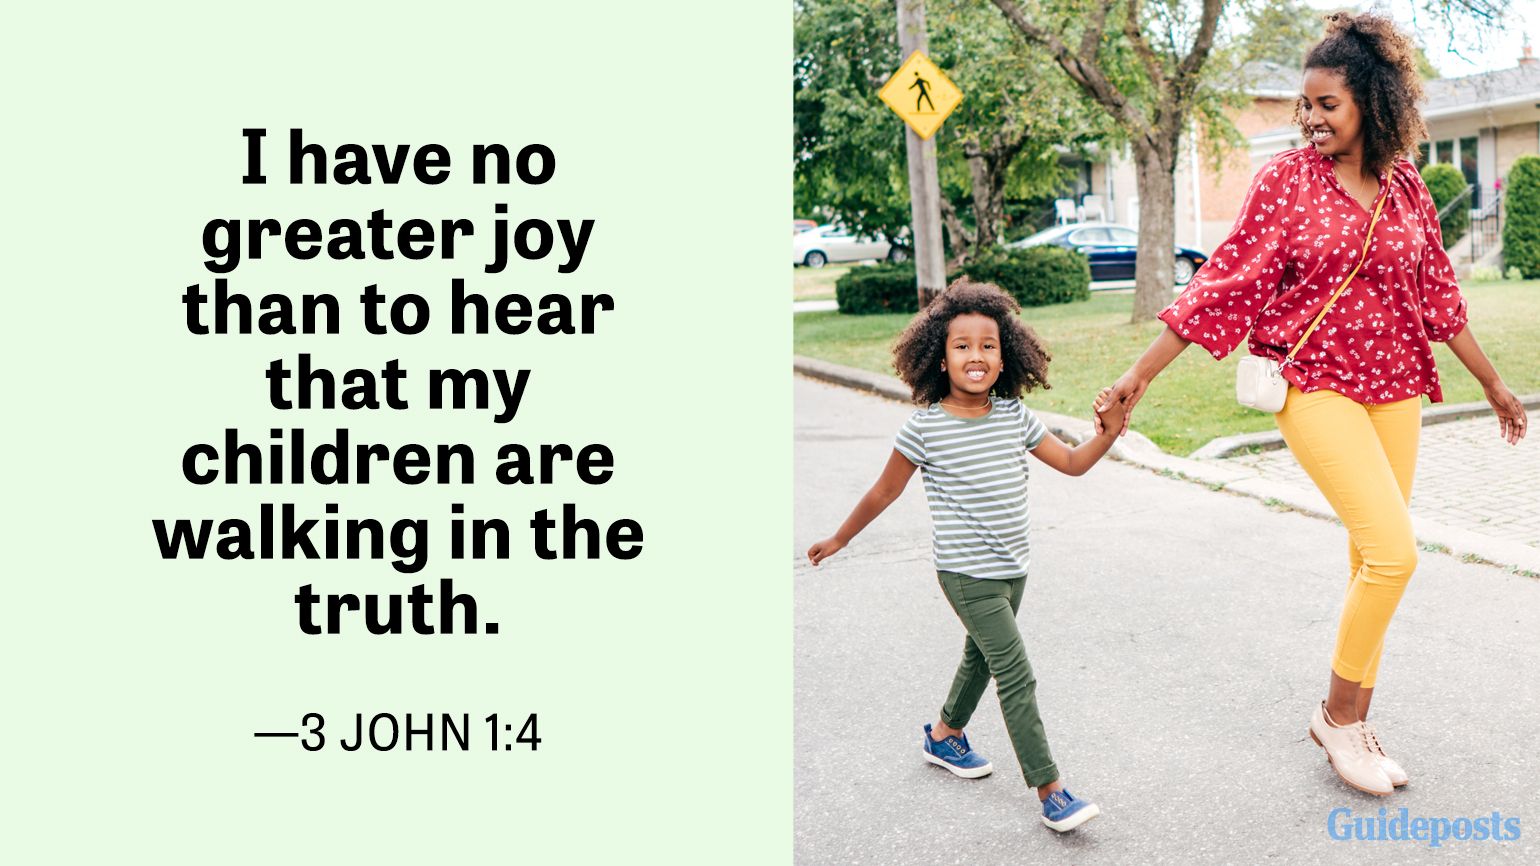 I have no greater joy than to hear that my children are walking in the truth.  —3 John 1:4